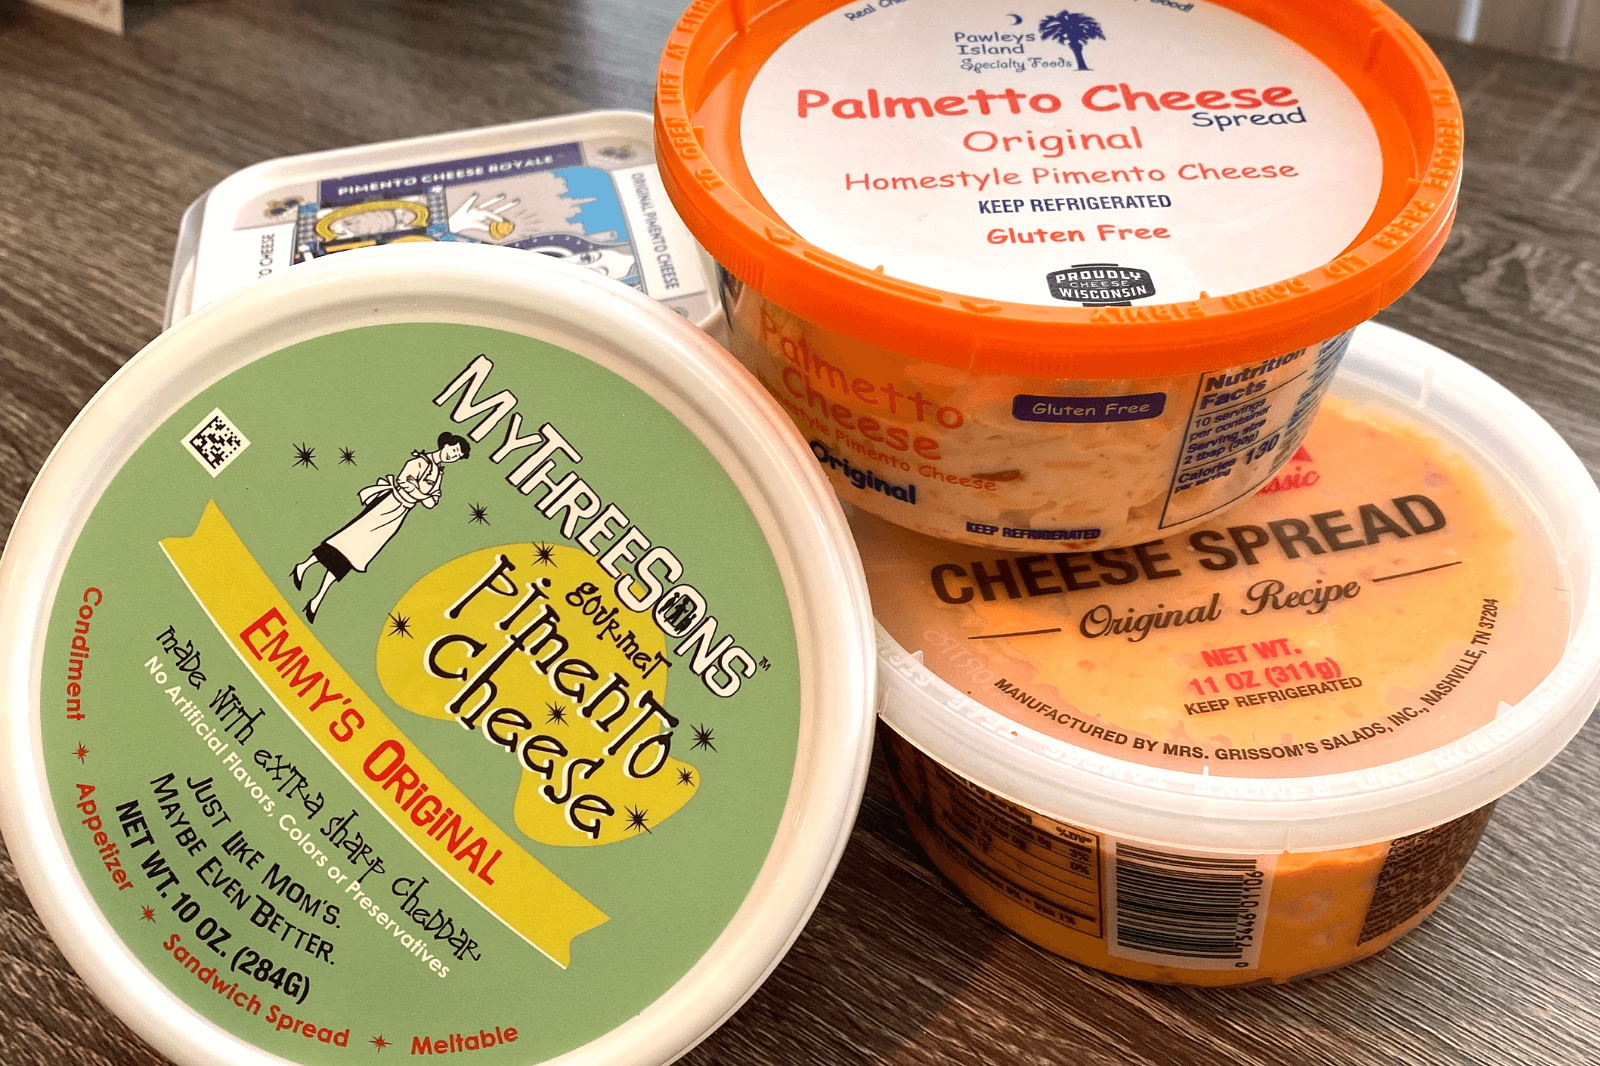 RANKED: Store-Bought Pimento Cheese Brands